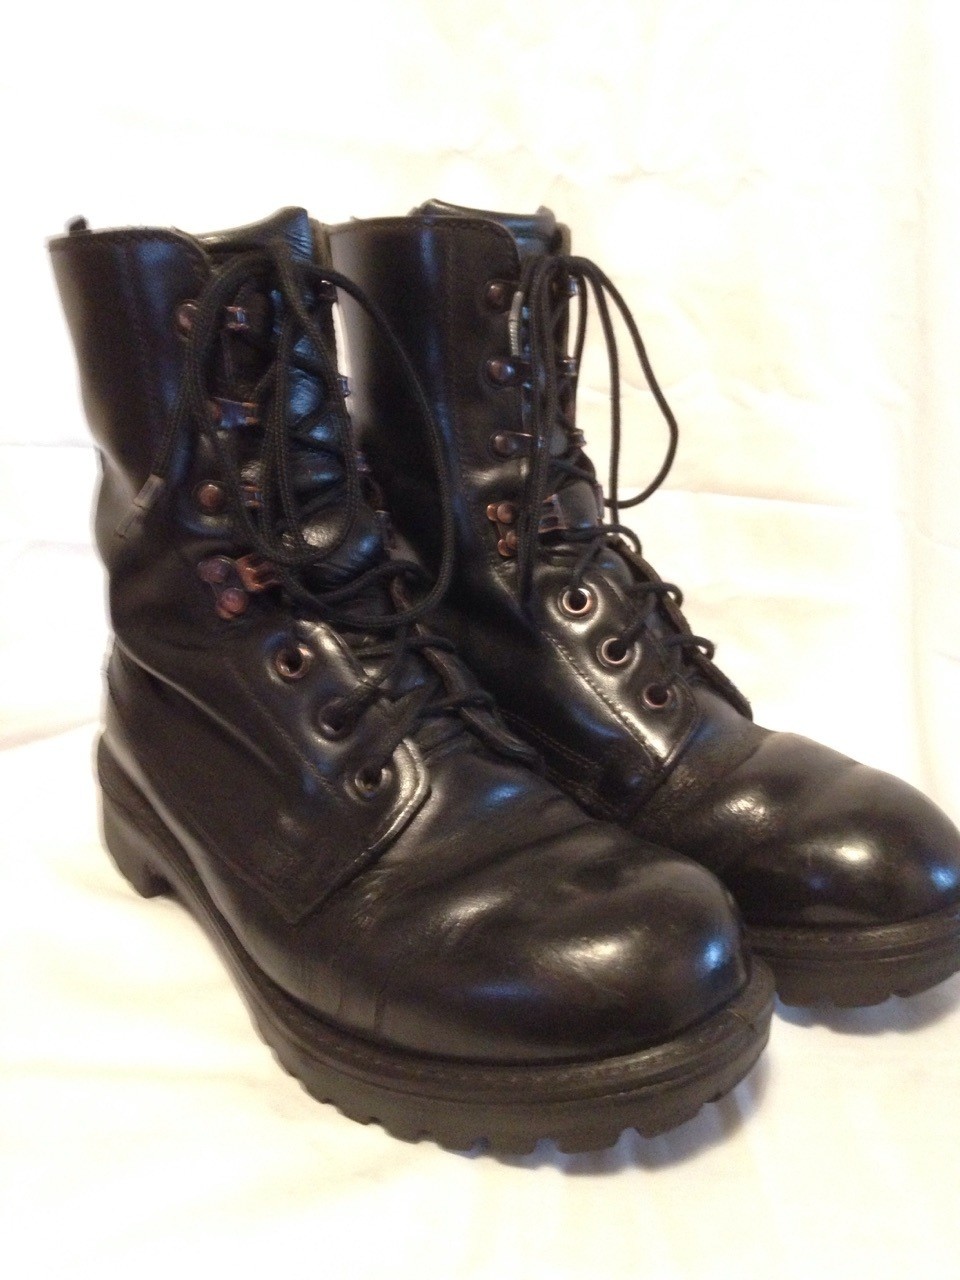 British Army Assault Boots Size 6M